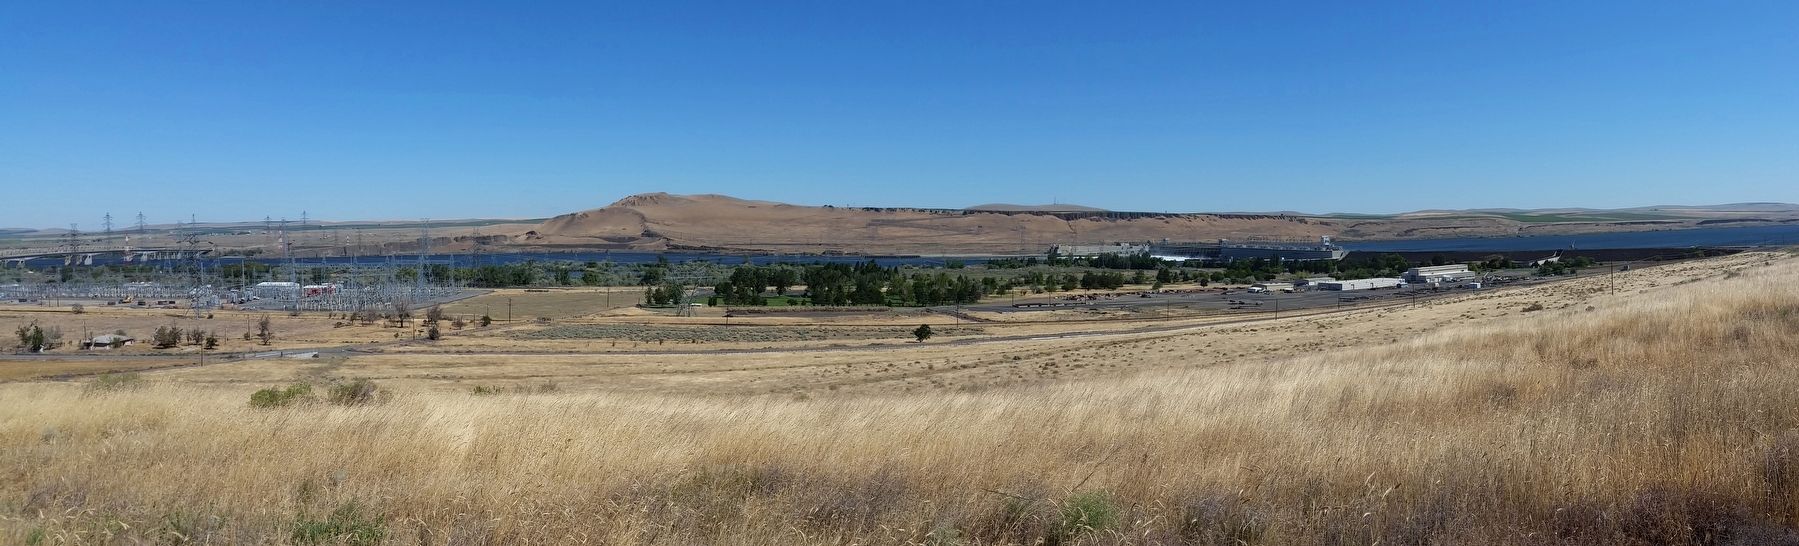 Columbia River, McNary Dam and Lake Wallula (<i>view from marker</i>) image. Click for full size.